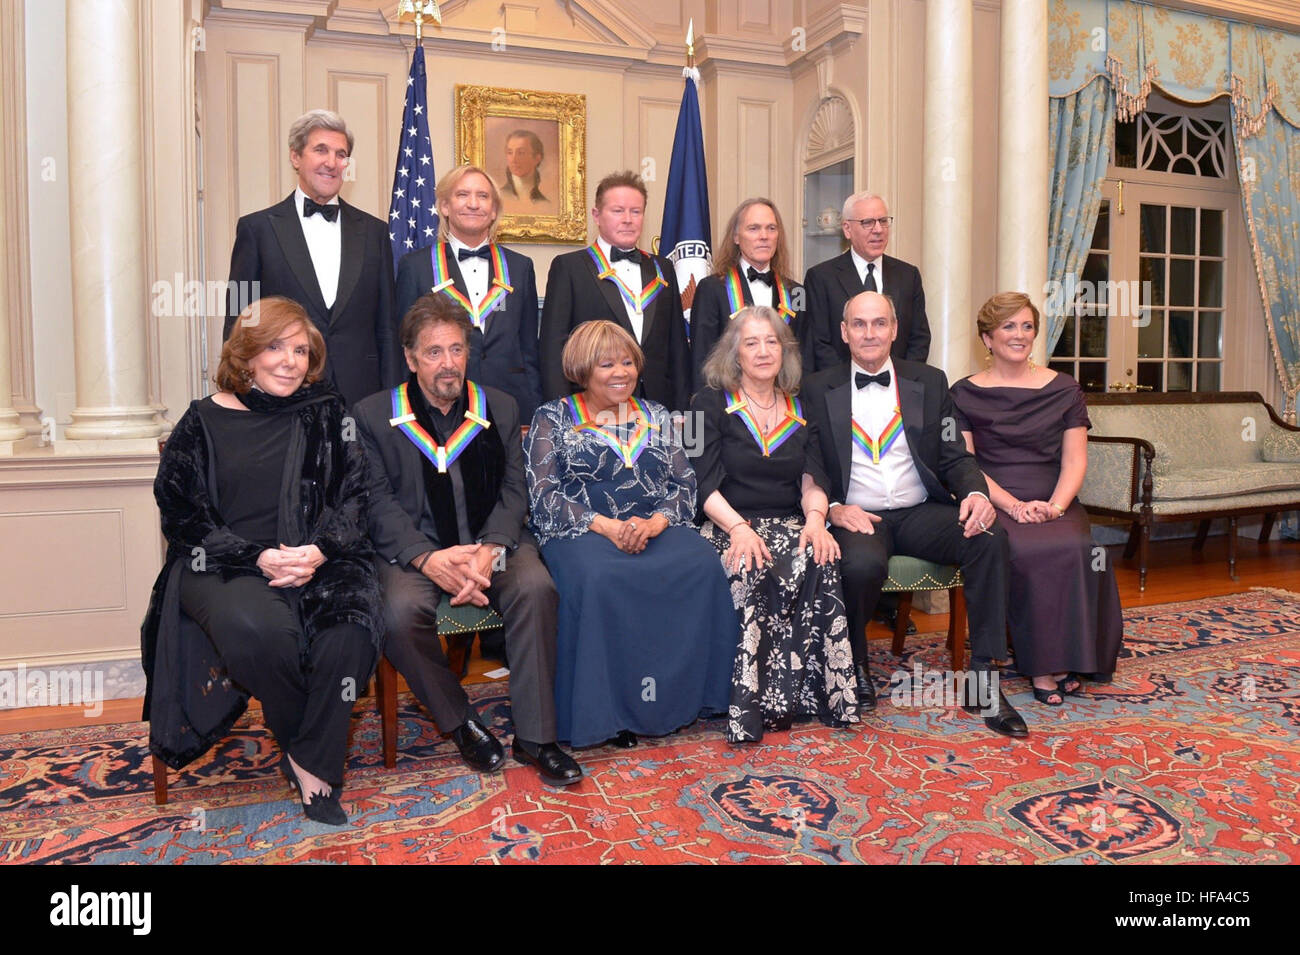 U.S. Secretary of State John Kerry poses for a photo with 2016 Kennedy Center Honorees at the Kennedy Center Honors Dinner at the U.S. Department of State, in Washington, D.C., on December 4, 2016. Stock Photo